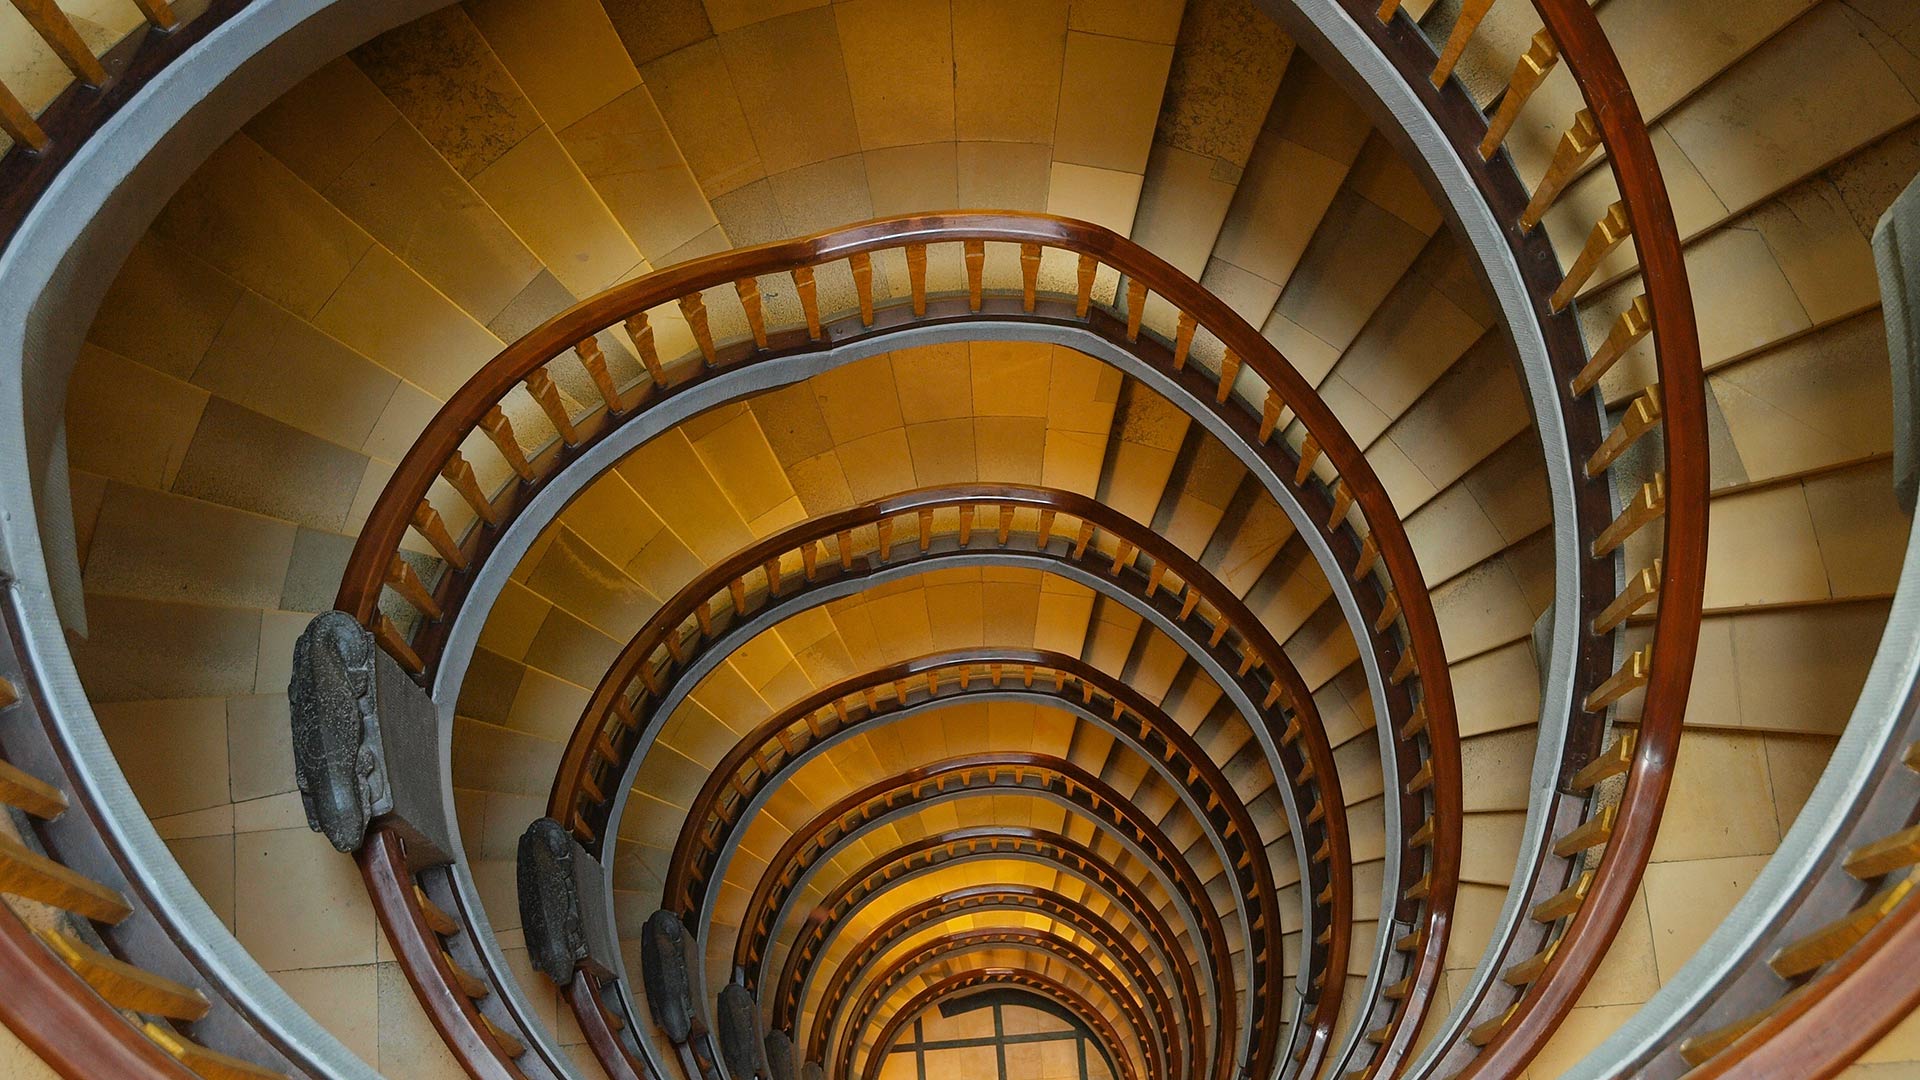 A spiral staircase in Hamburg, Germany